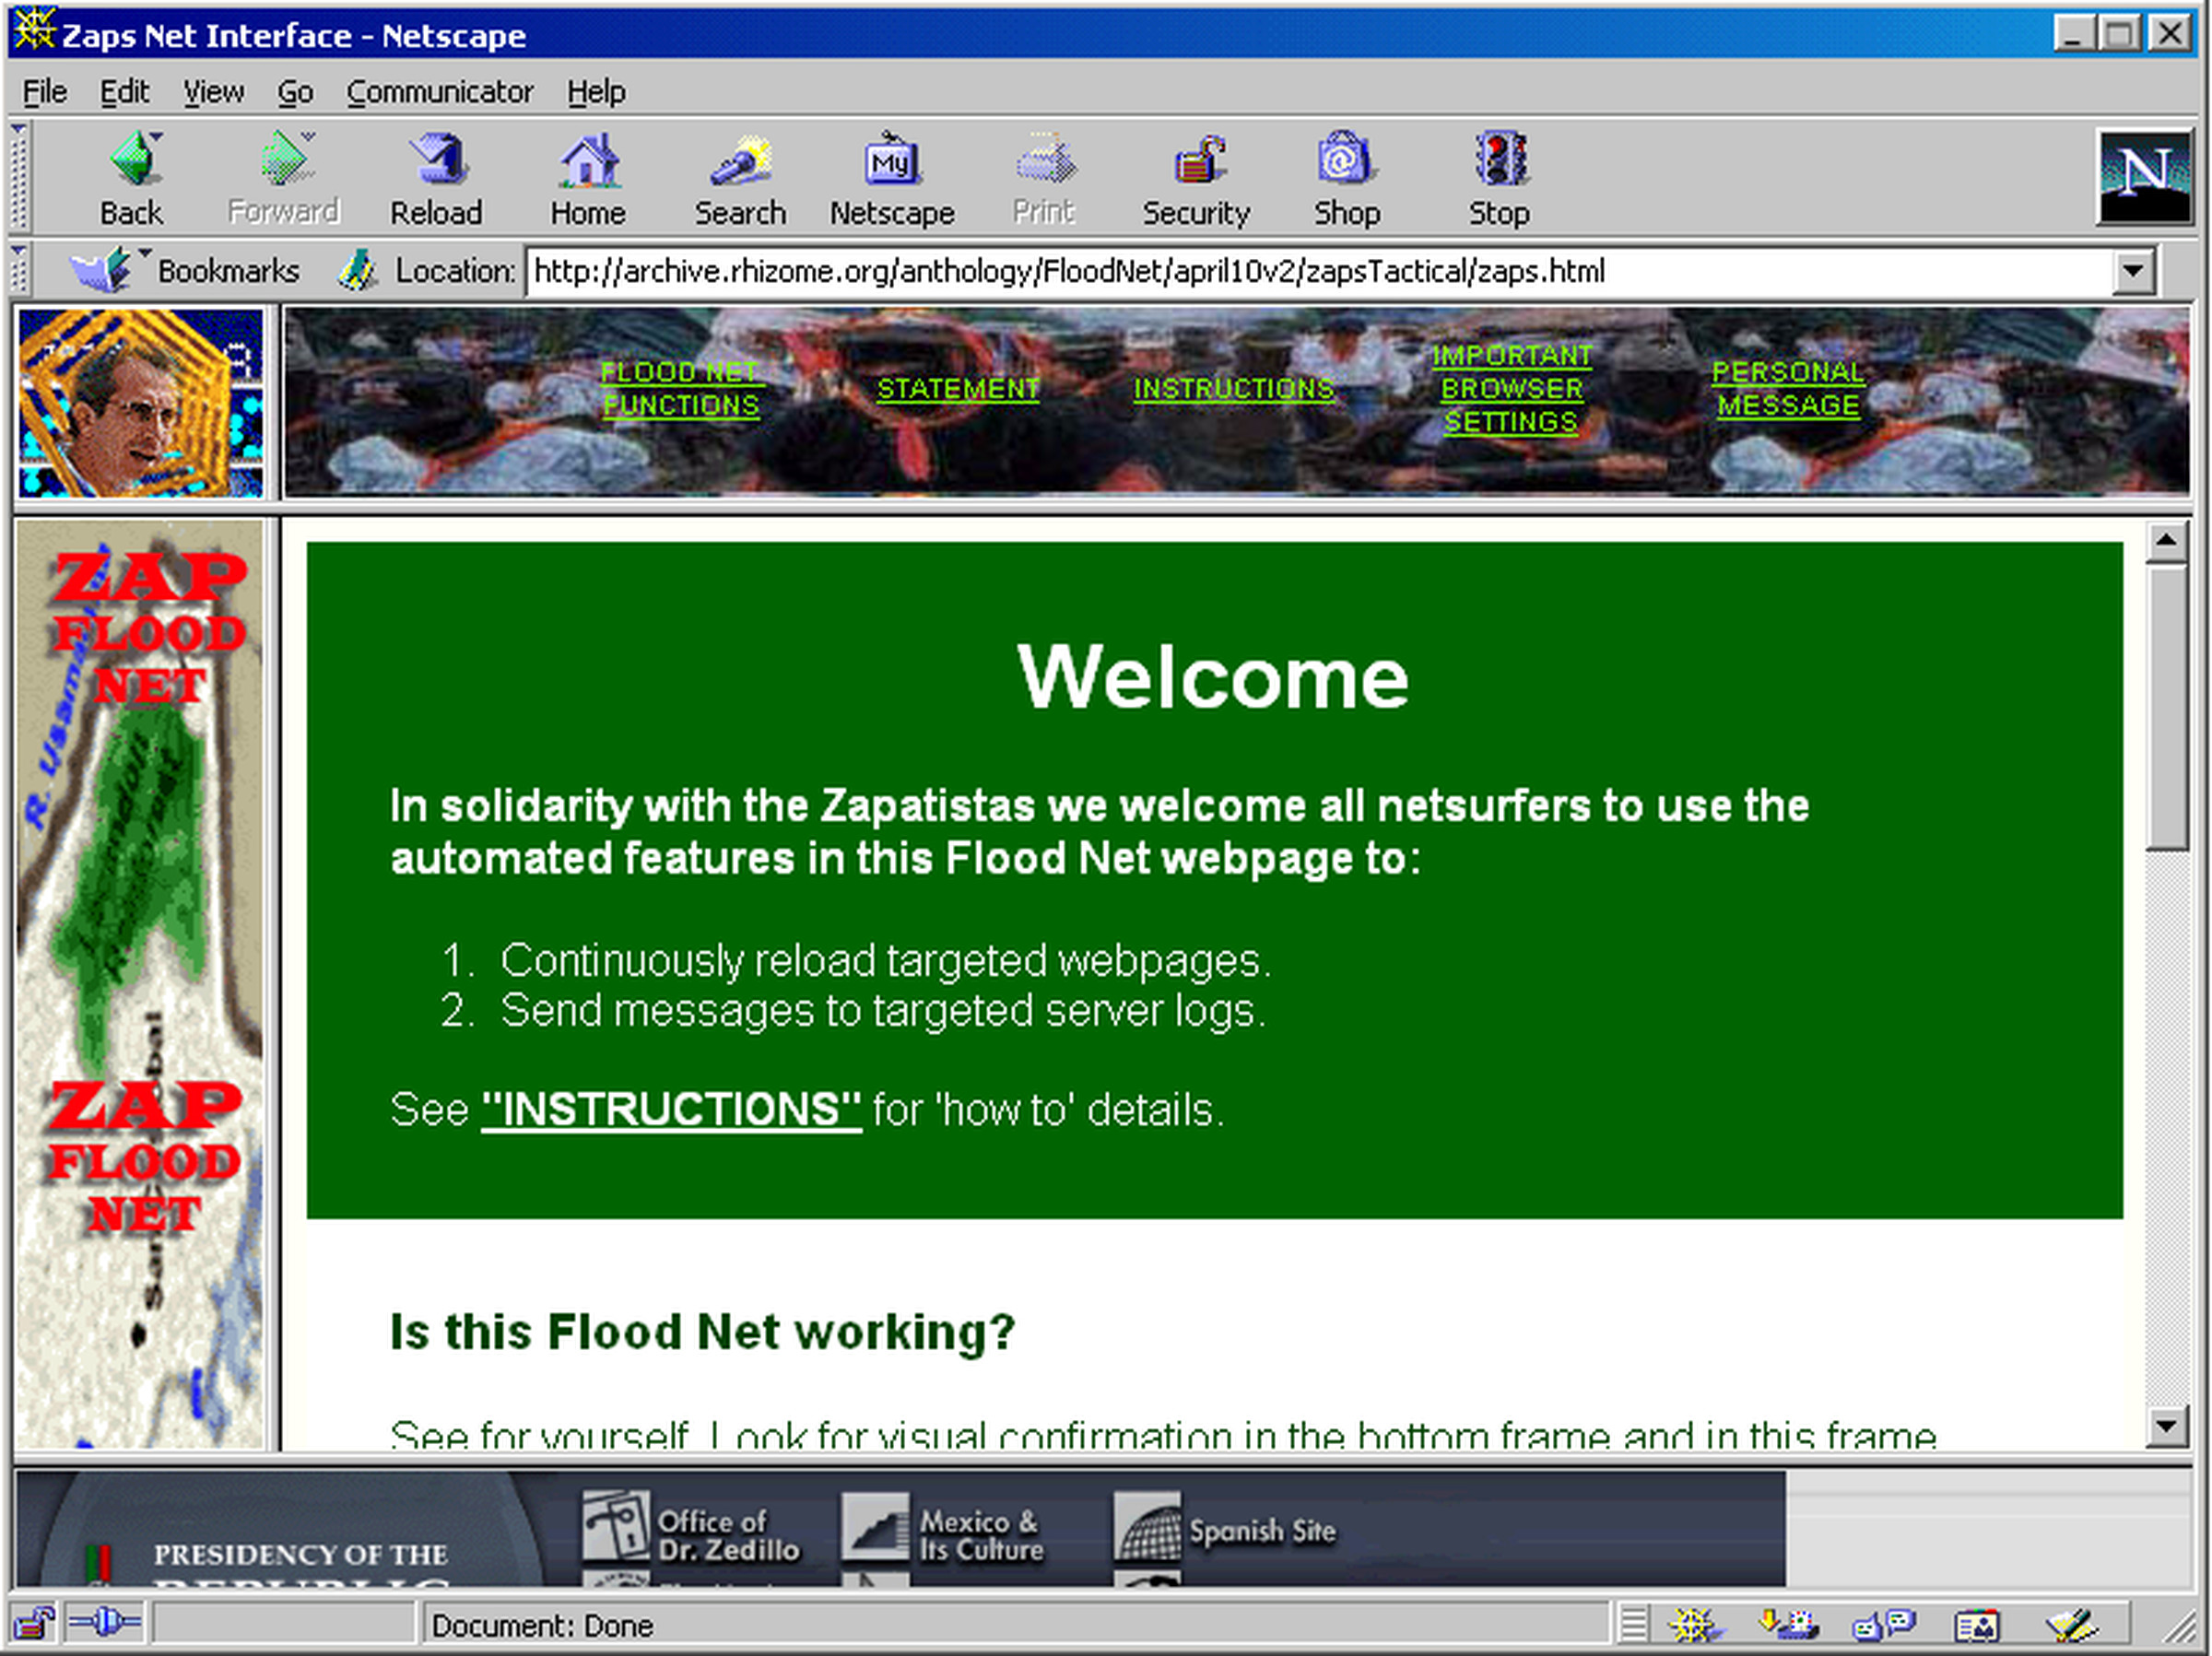 A screenshot of the original FloodNet program. A full, working version of the program has been preserved by Rhizome, a non-profit dedicated to new media and digital art.